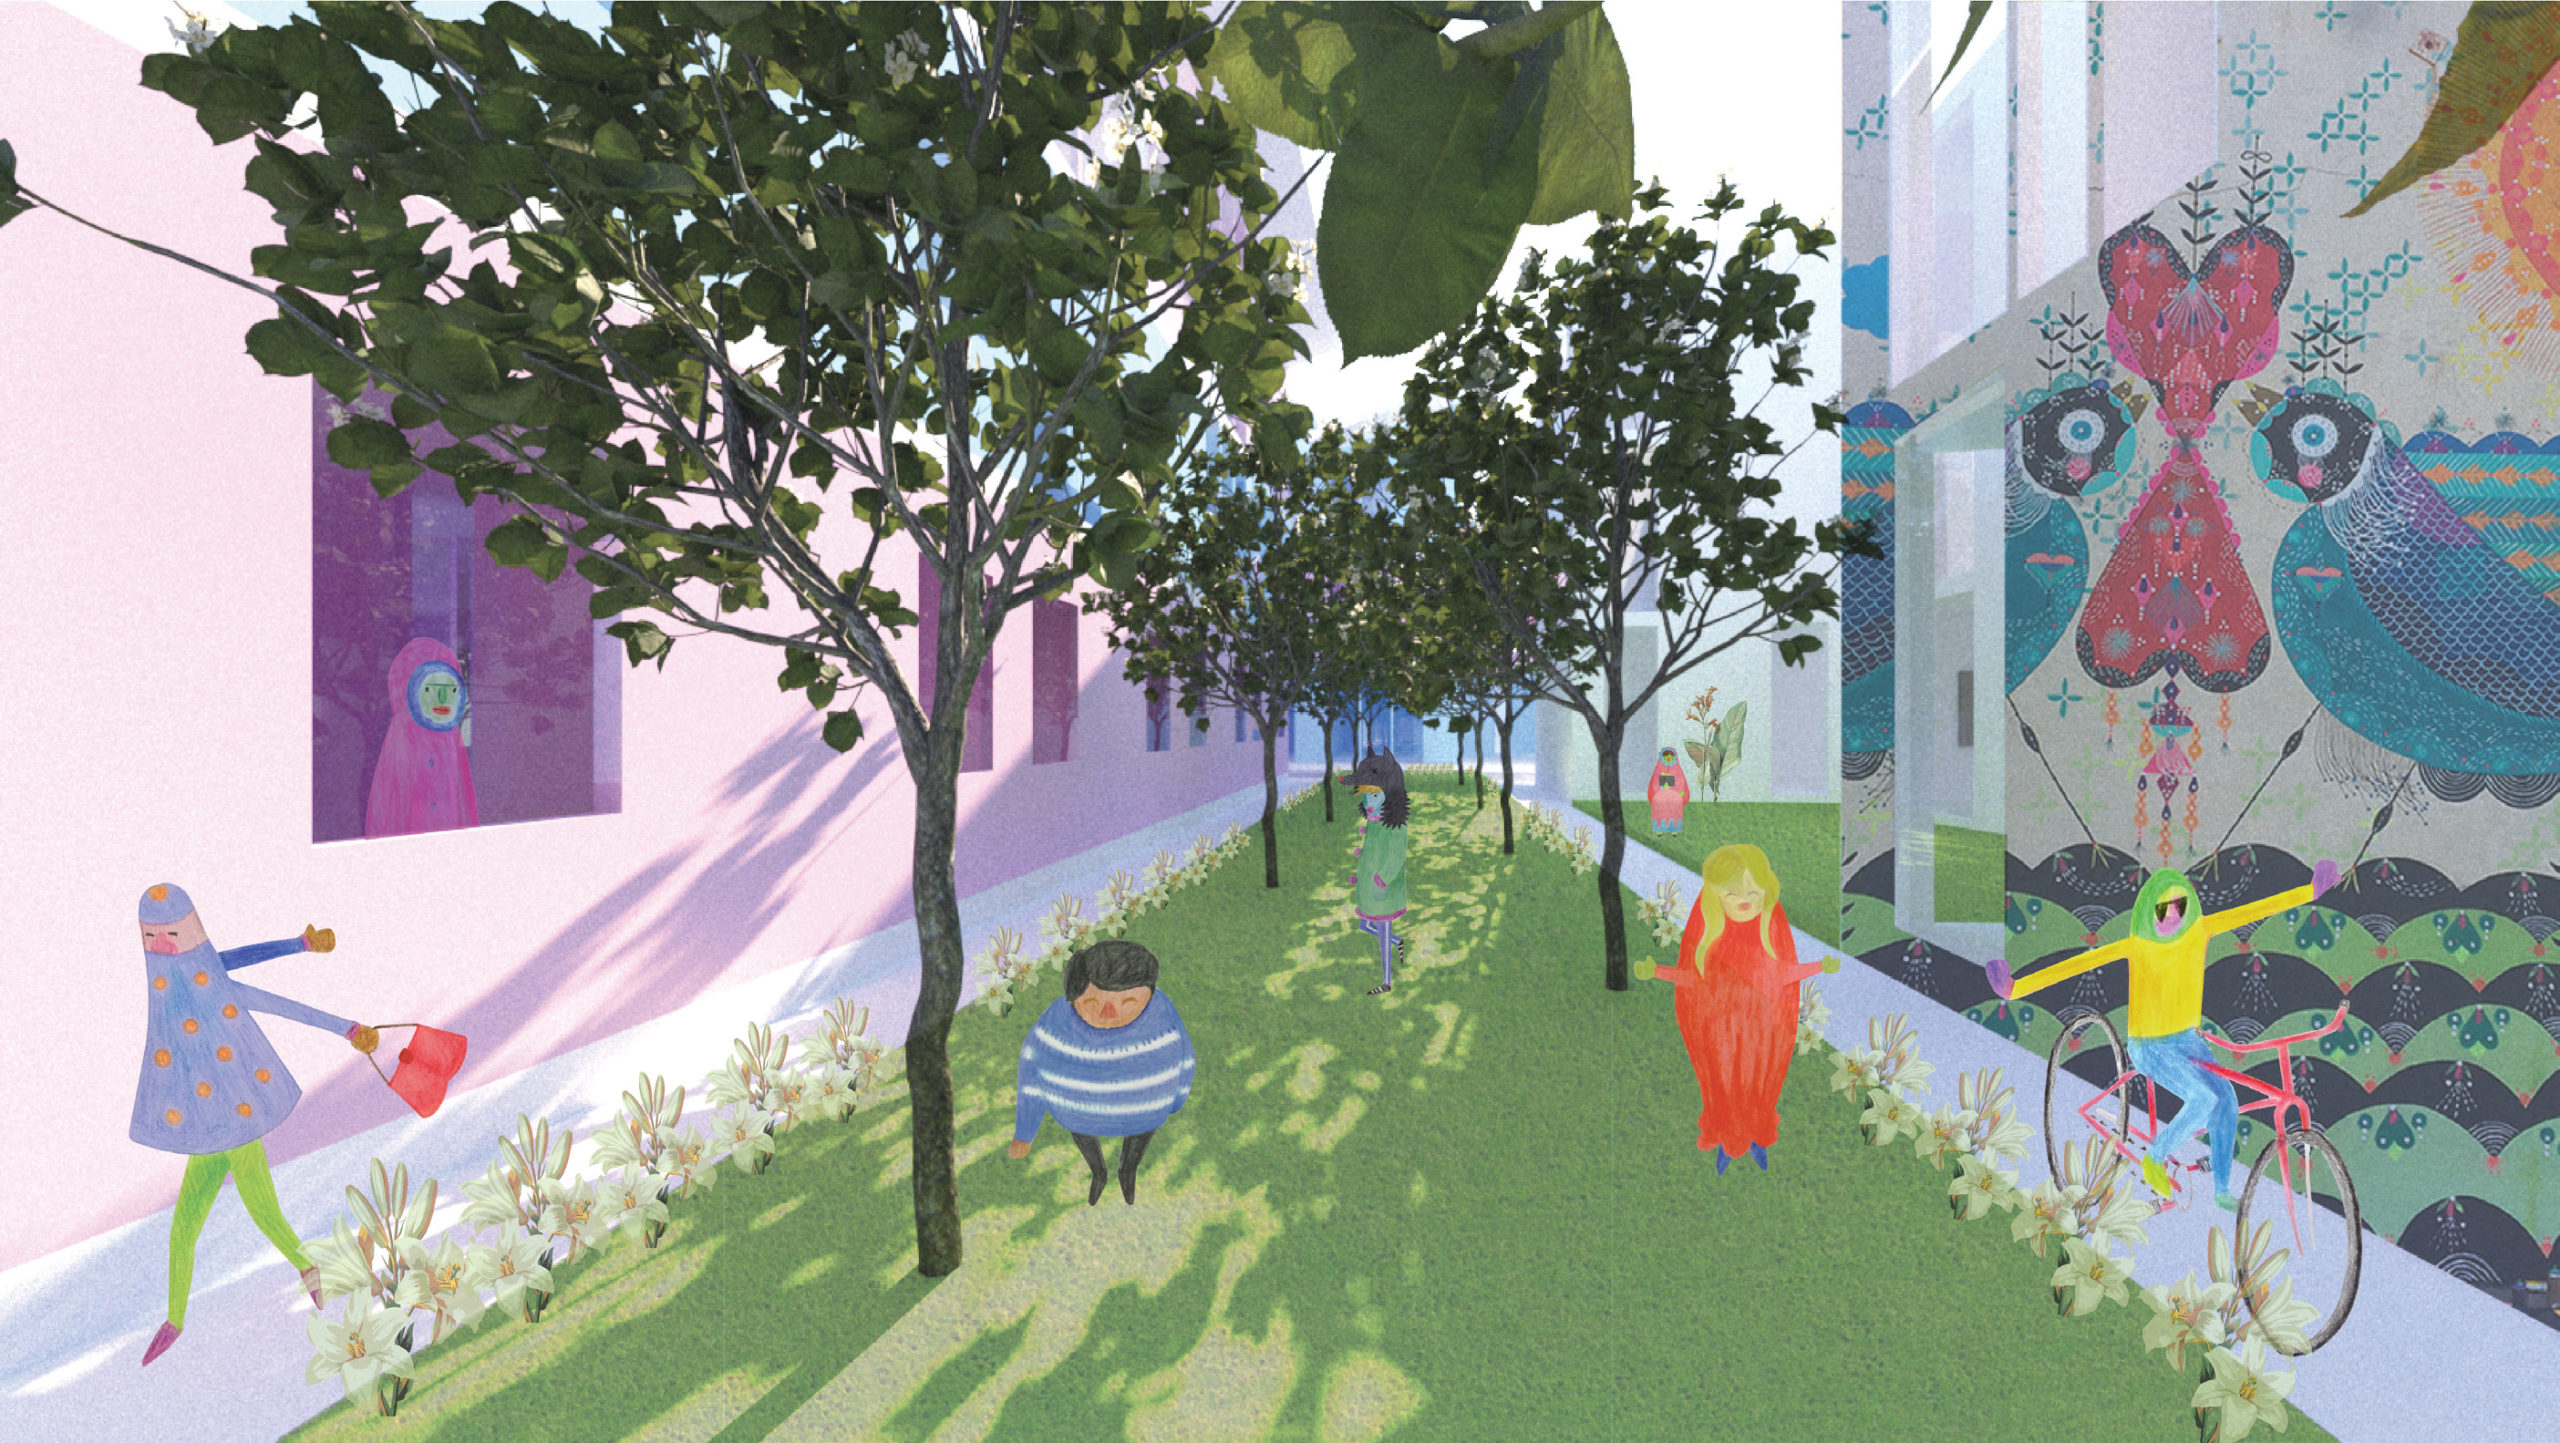 A colorful illustration of people of various shapes walking, bicycling, and enjoying an outdoor space next to housing that's shaded with trees and facing art murals.